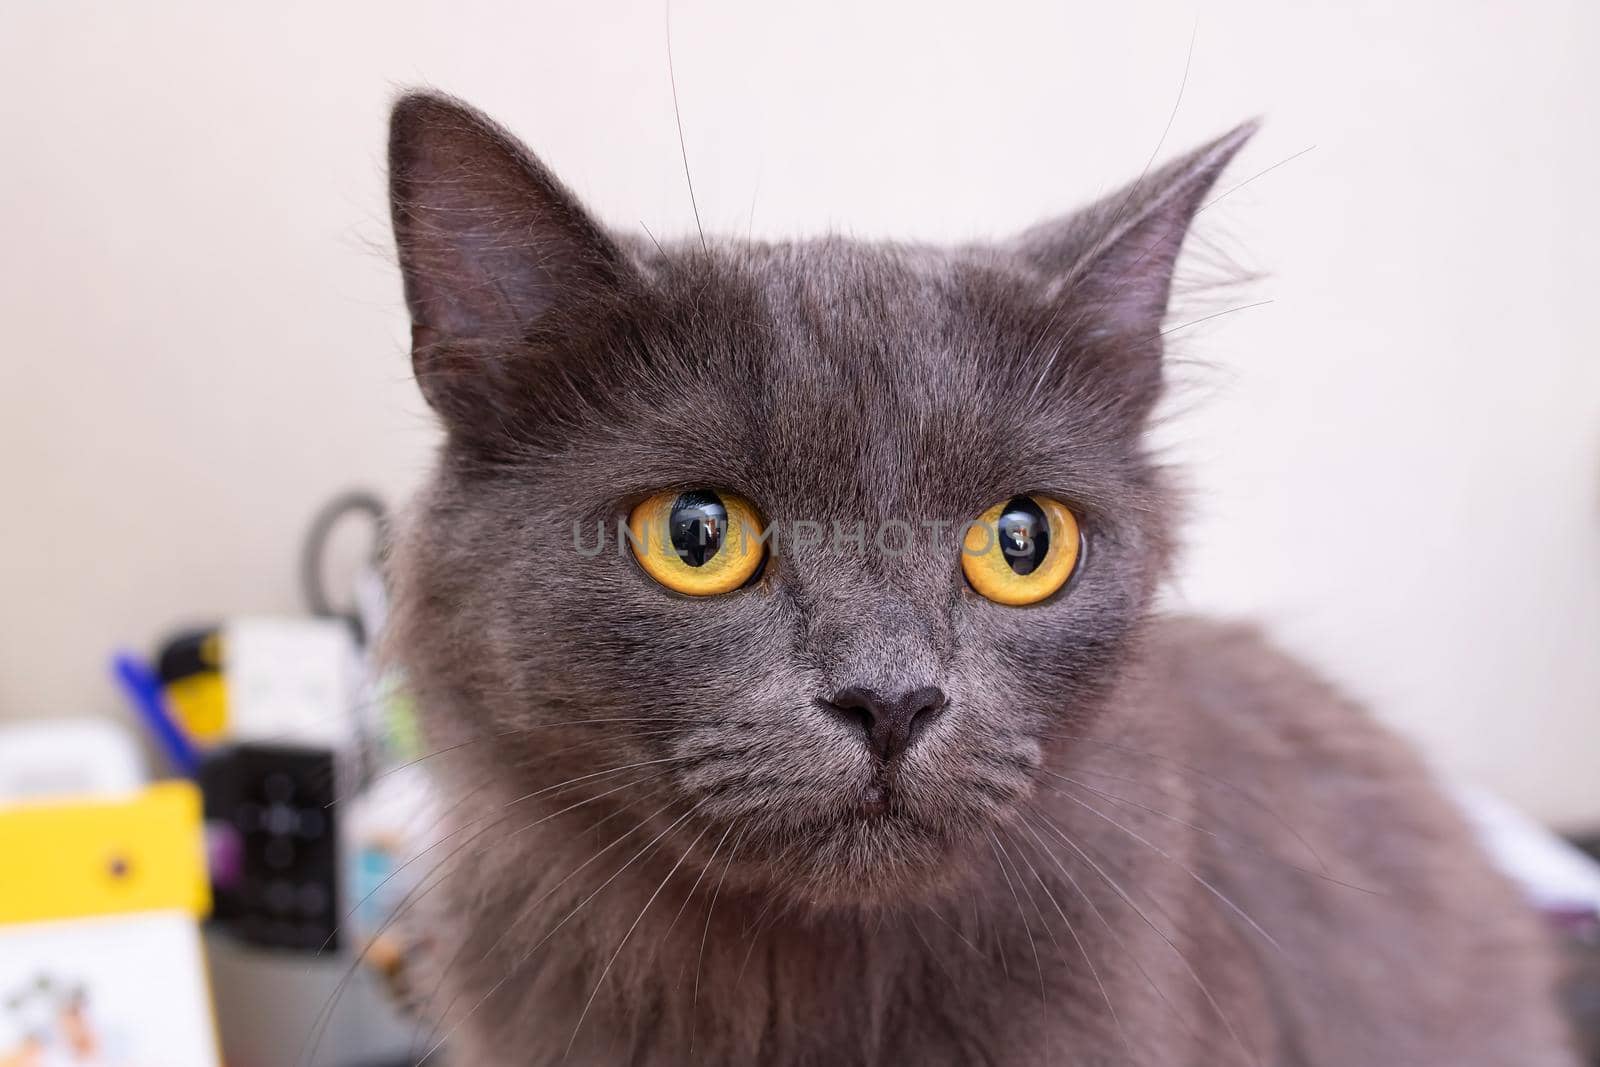 Gray cat with yellow eyes close up portrait